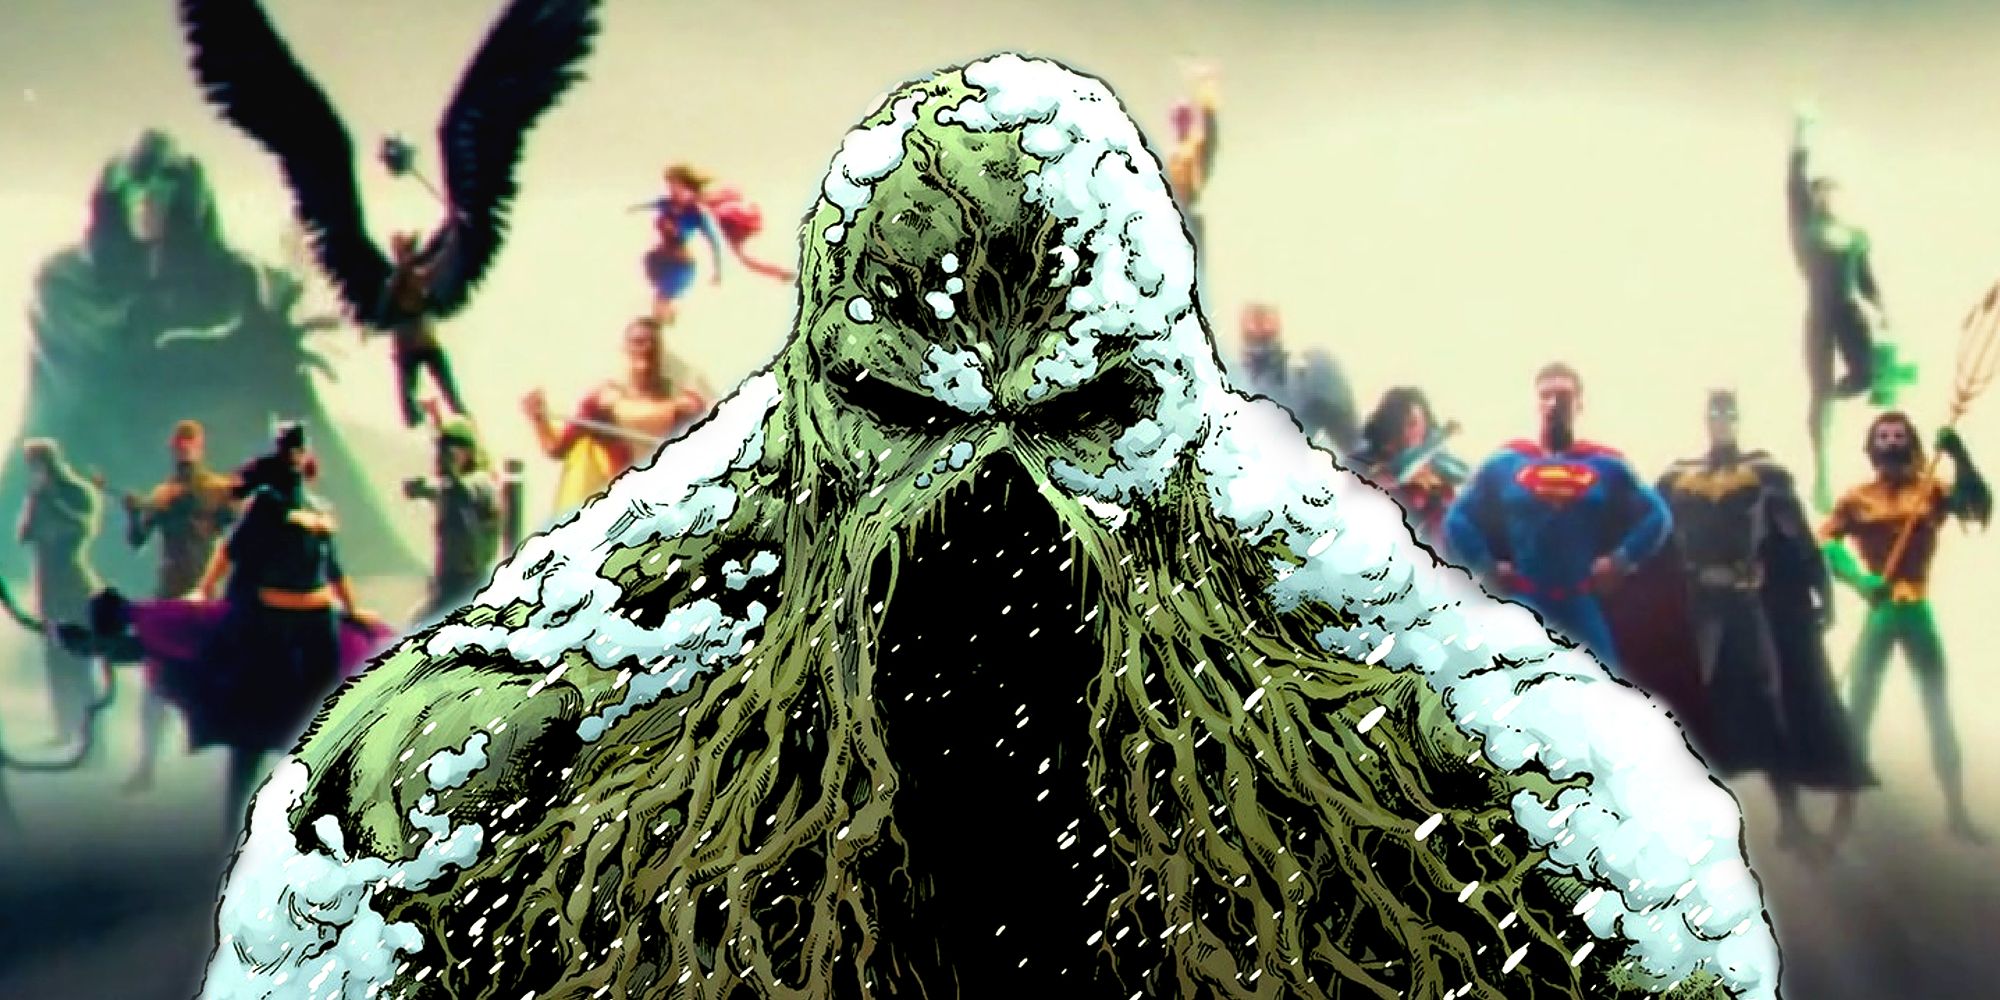 Custom image of Swamp Thing in front of the Justice League